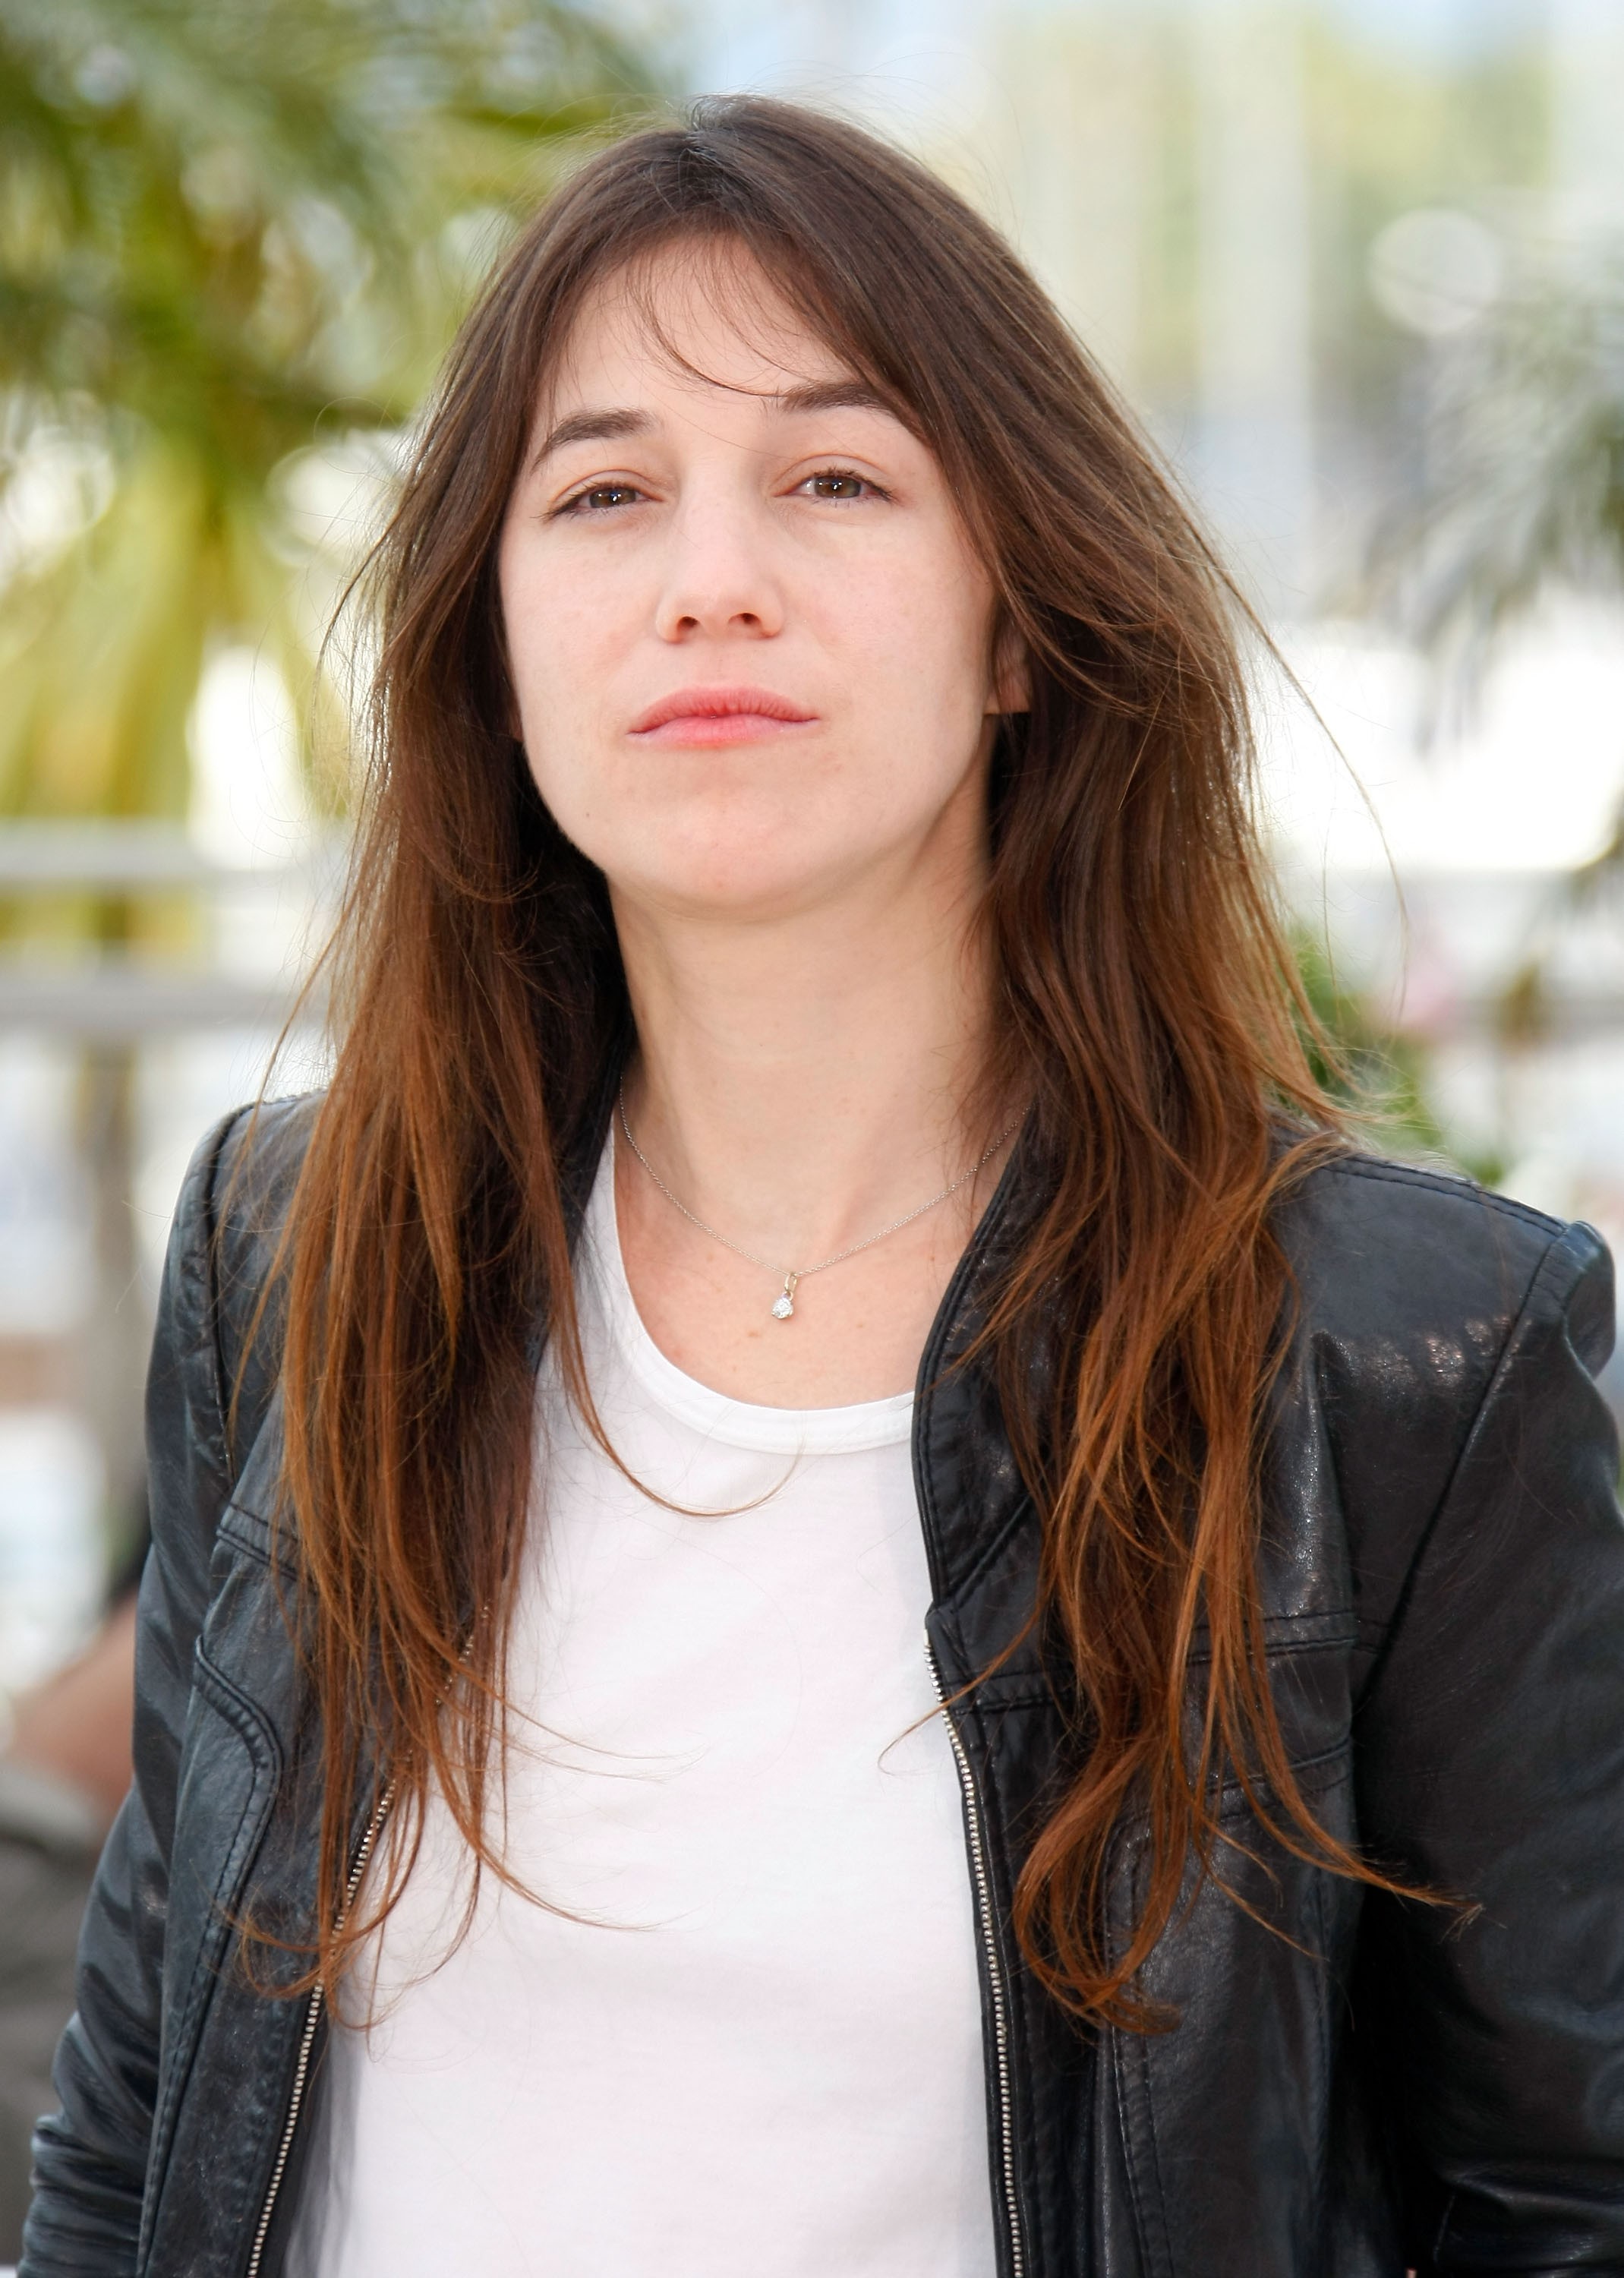 CANNES, FRANCE - MAY 18:  Actress Charlotte Gainsbourg attends the Antichrist Photocall held at the Palais Des Festivals during the 62nd International Cannes Film Festival on May 18, 2009 in Cannes, France.  (Photo by Michael Buckner/Getty Images) (Foto: Getty Images)